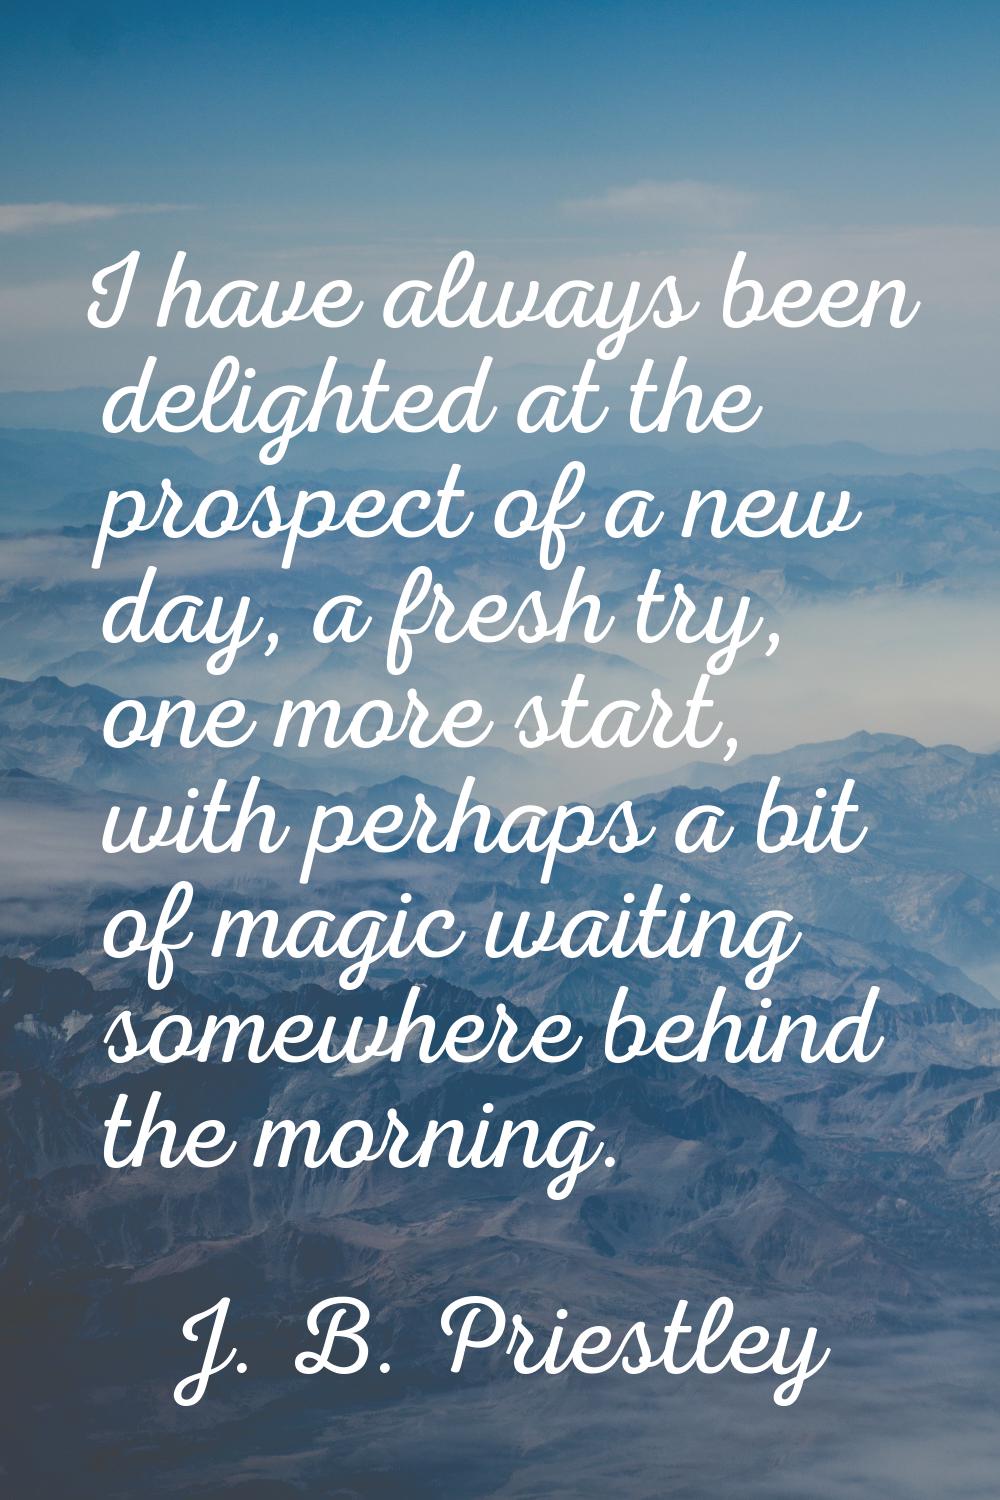 I have always been delighted at the prospect of a new day, a fresh try, one more start, with perhap